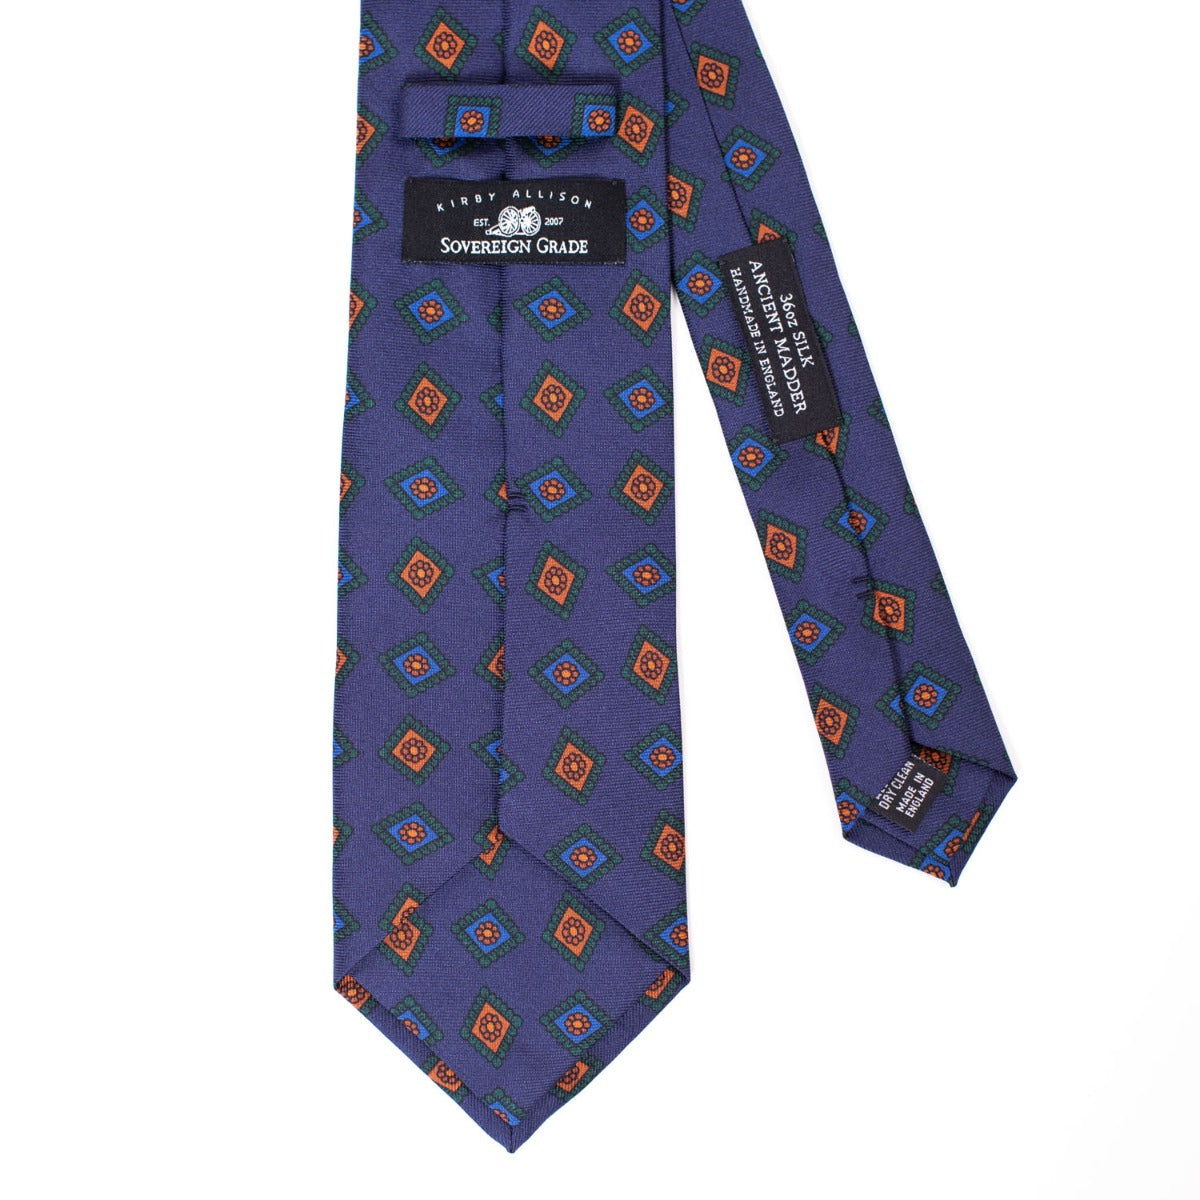 A quality Sovereign Grade Navy w/Green Art Deco Ancient Madder necktie from KirbyAllison.com with a purple, orange, and blue pattern.